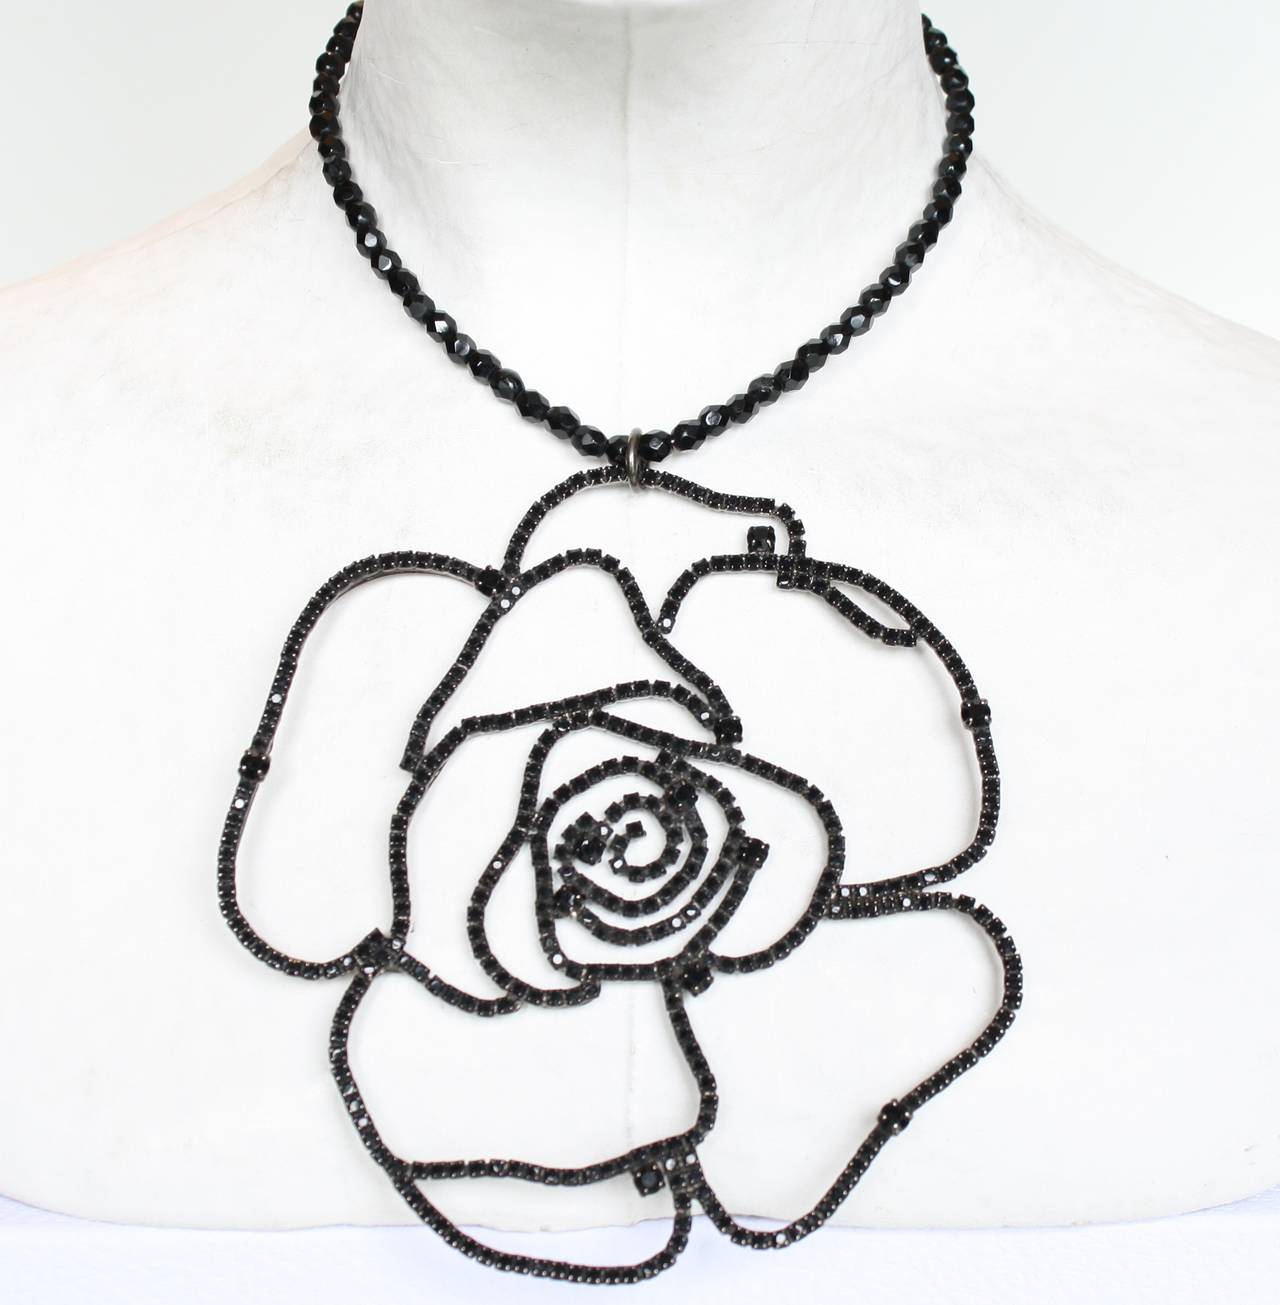 Delicate, yet packing a major punch, this camellia necklace from Francoise Montague is handmade with black Swarovski crystals and black glass beads. 

14